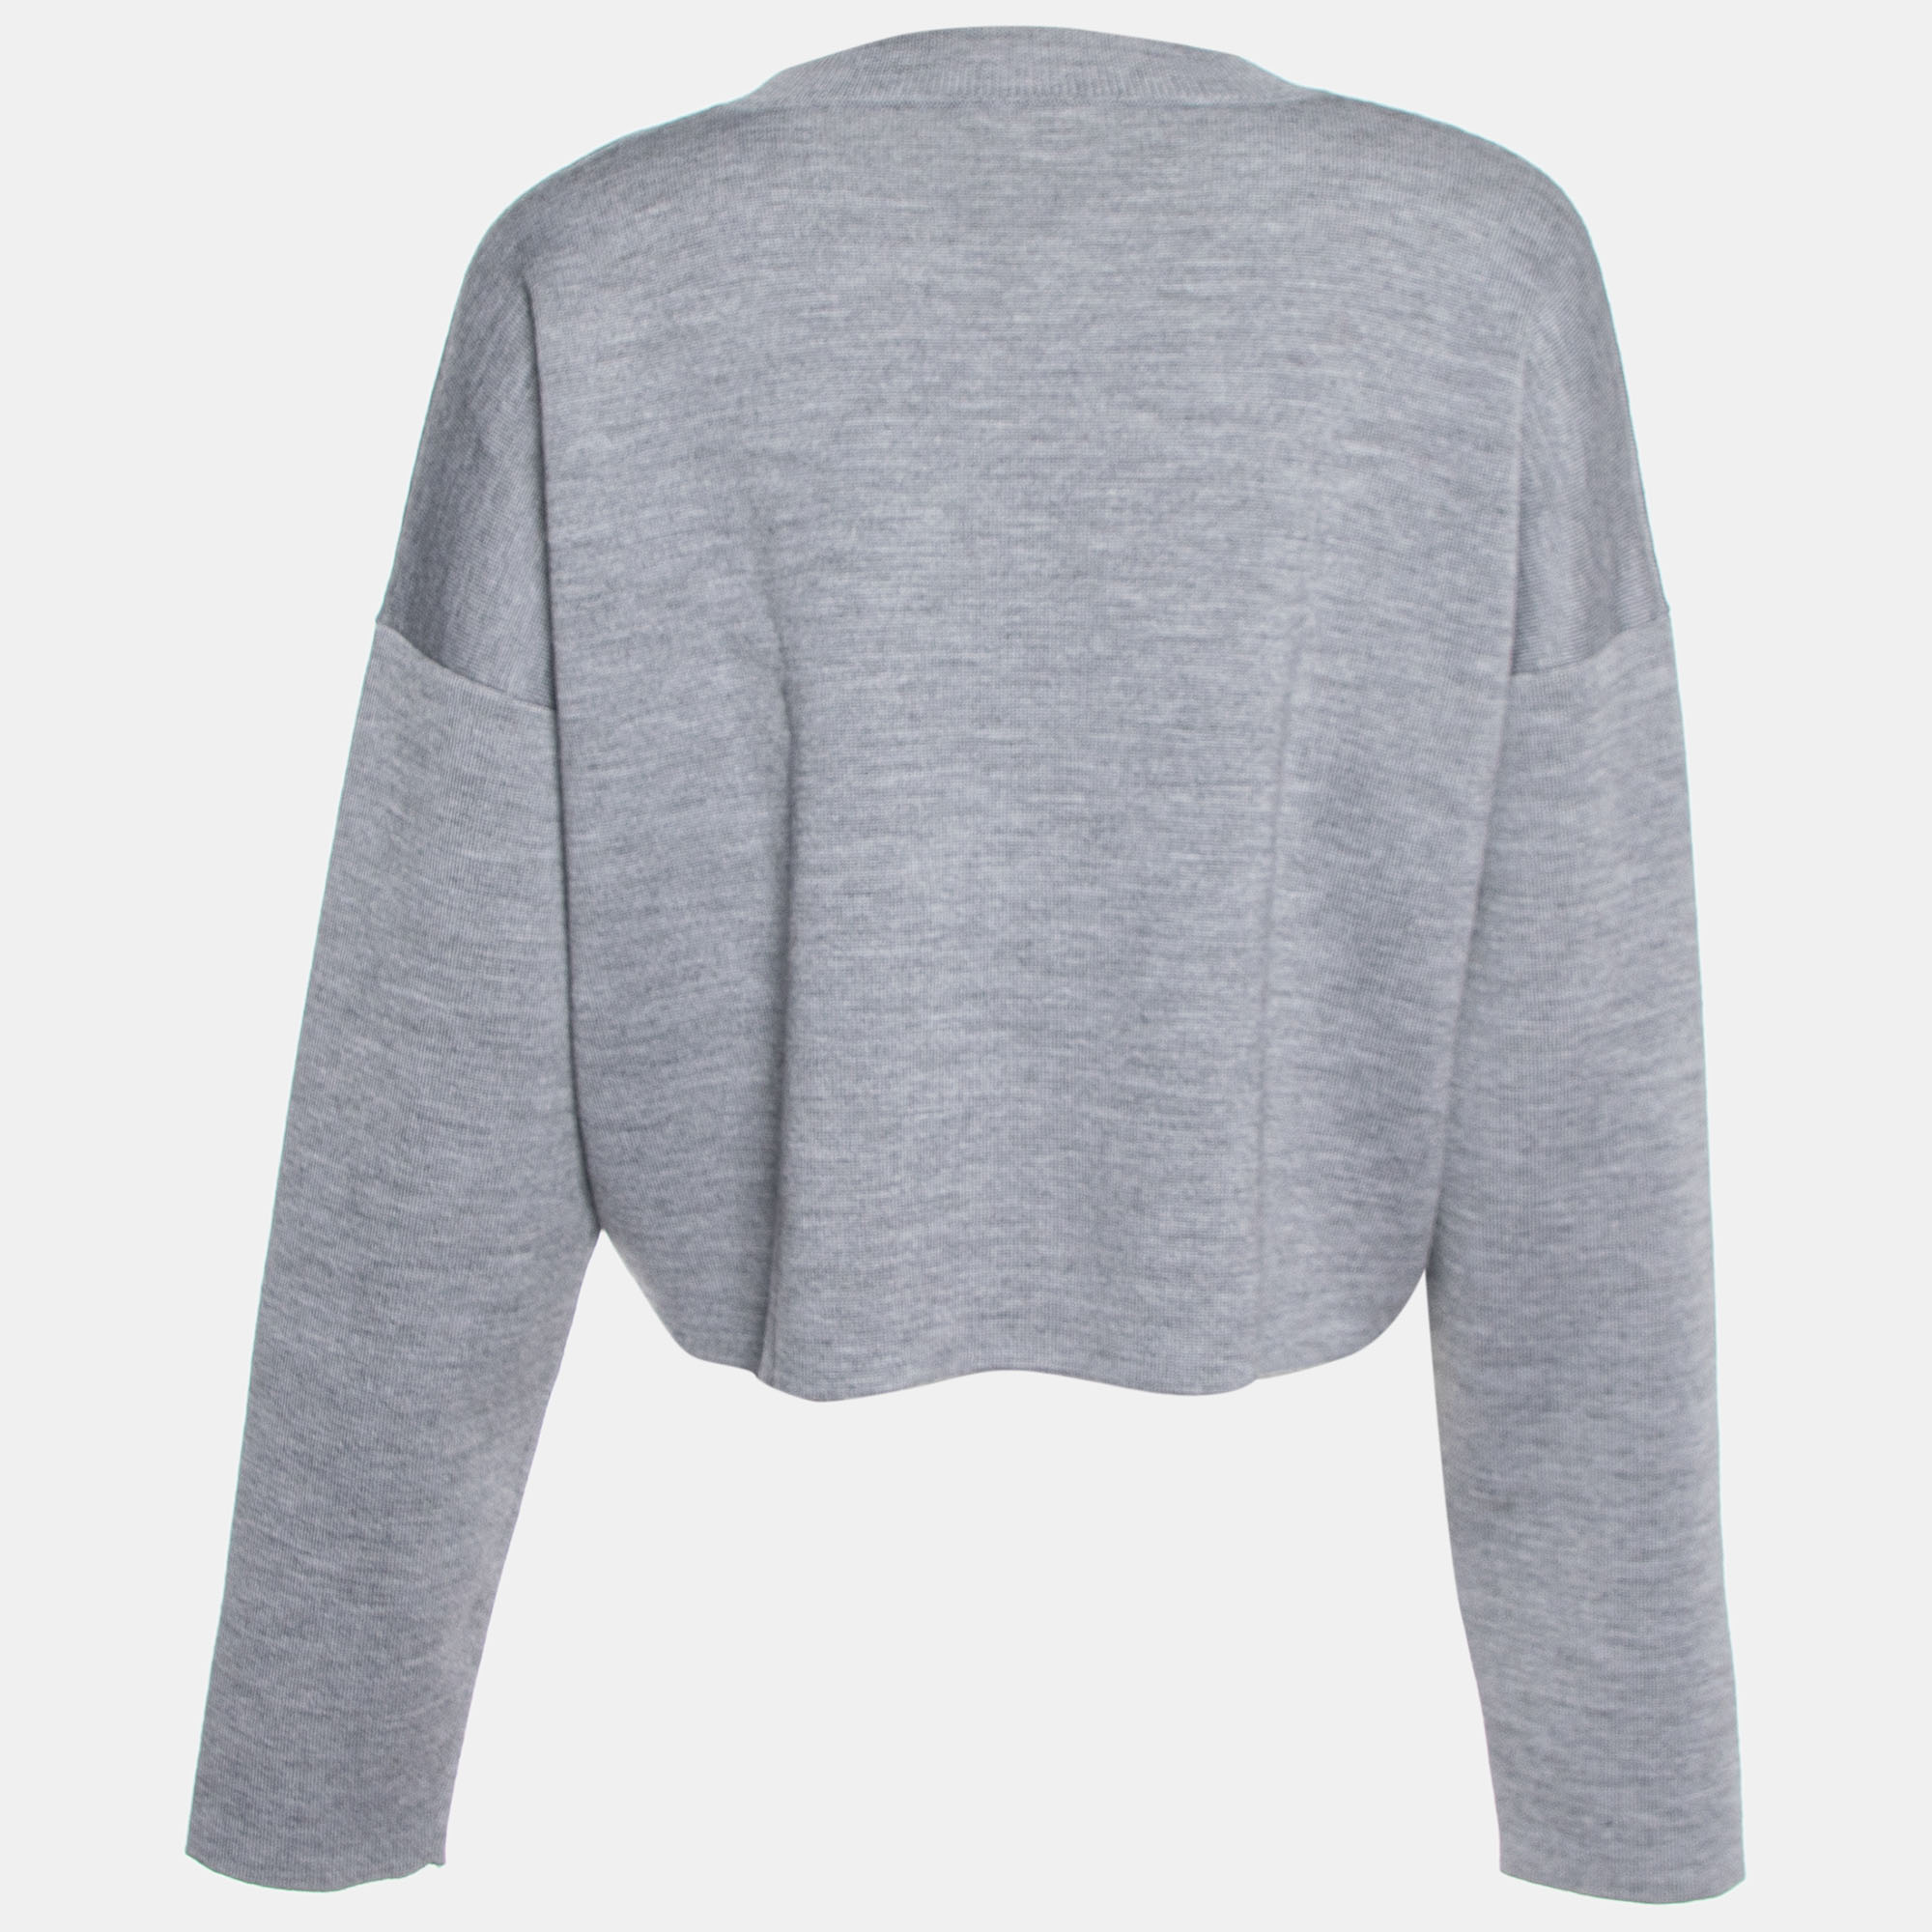 Sweaters & Cardigans  The Luxury Closet Loewe Grey Anagram Wool Knit Cropped Sweater M